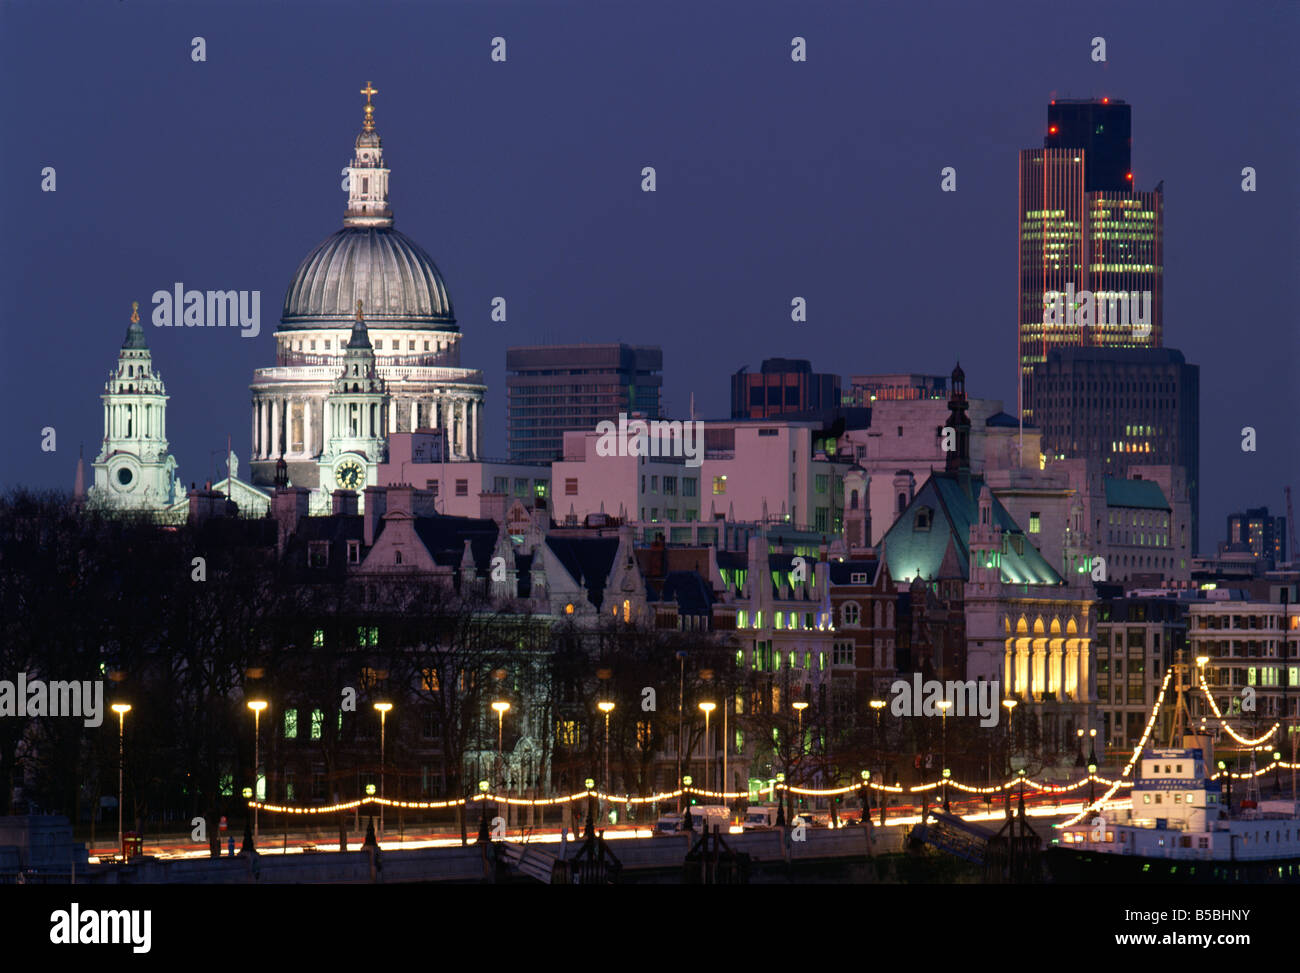 City skyline, including St.Paul's Cathedral and the NatWest Tower, from across the Thames at dusk, London, England, UK Stock Photo